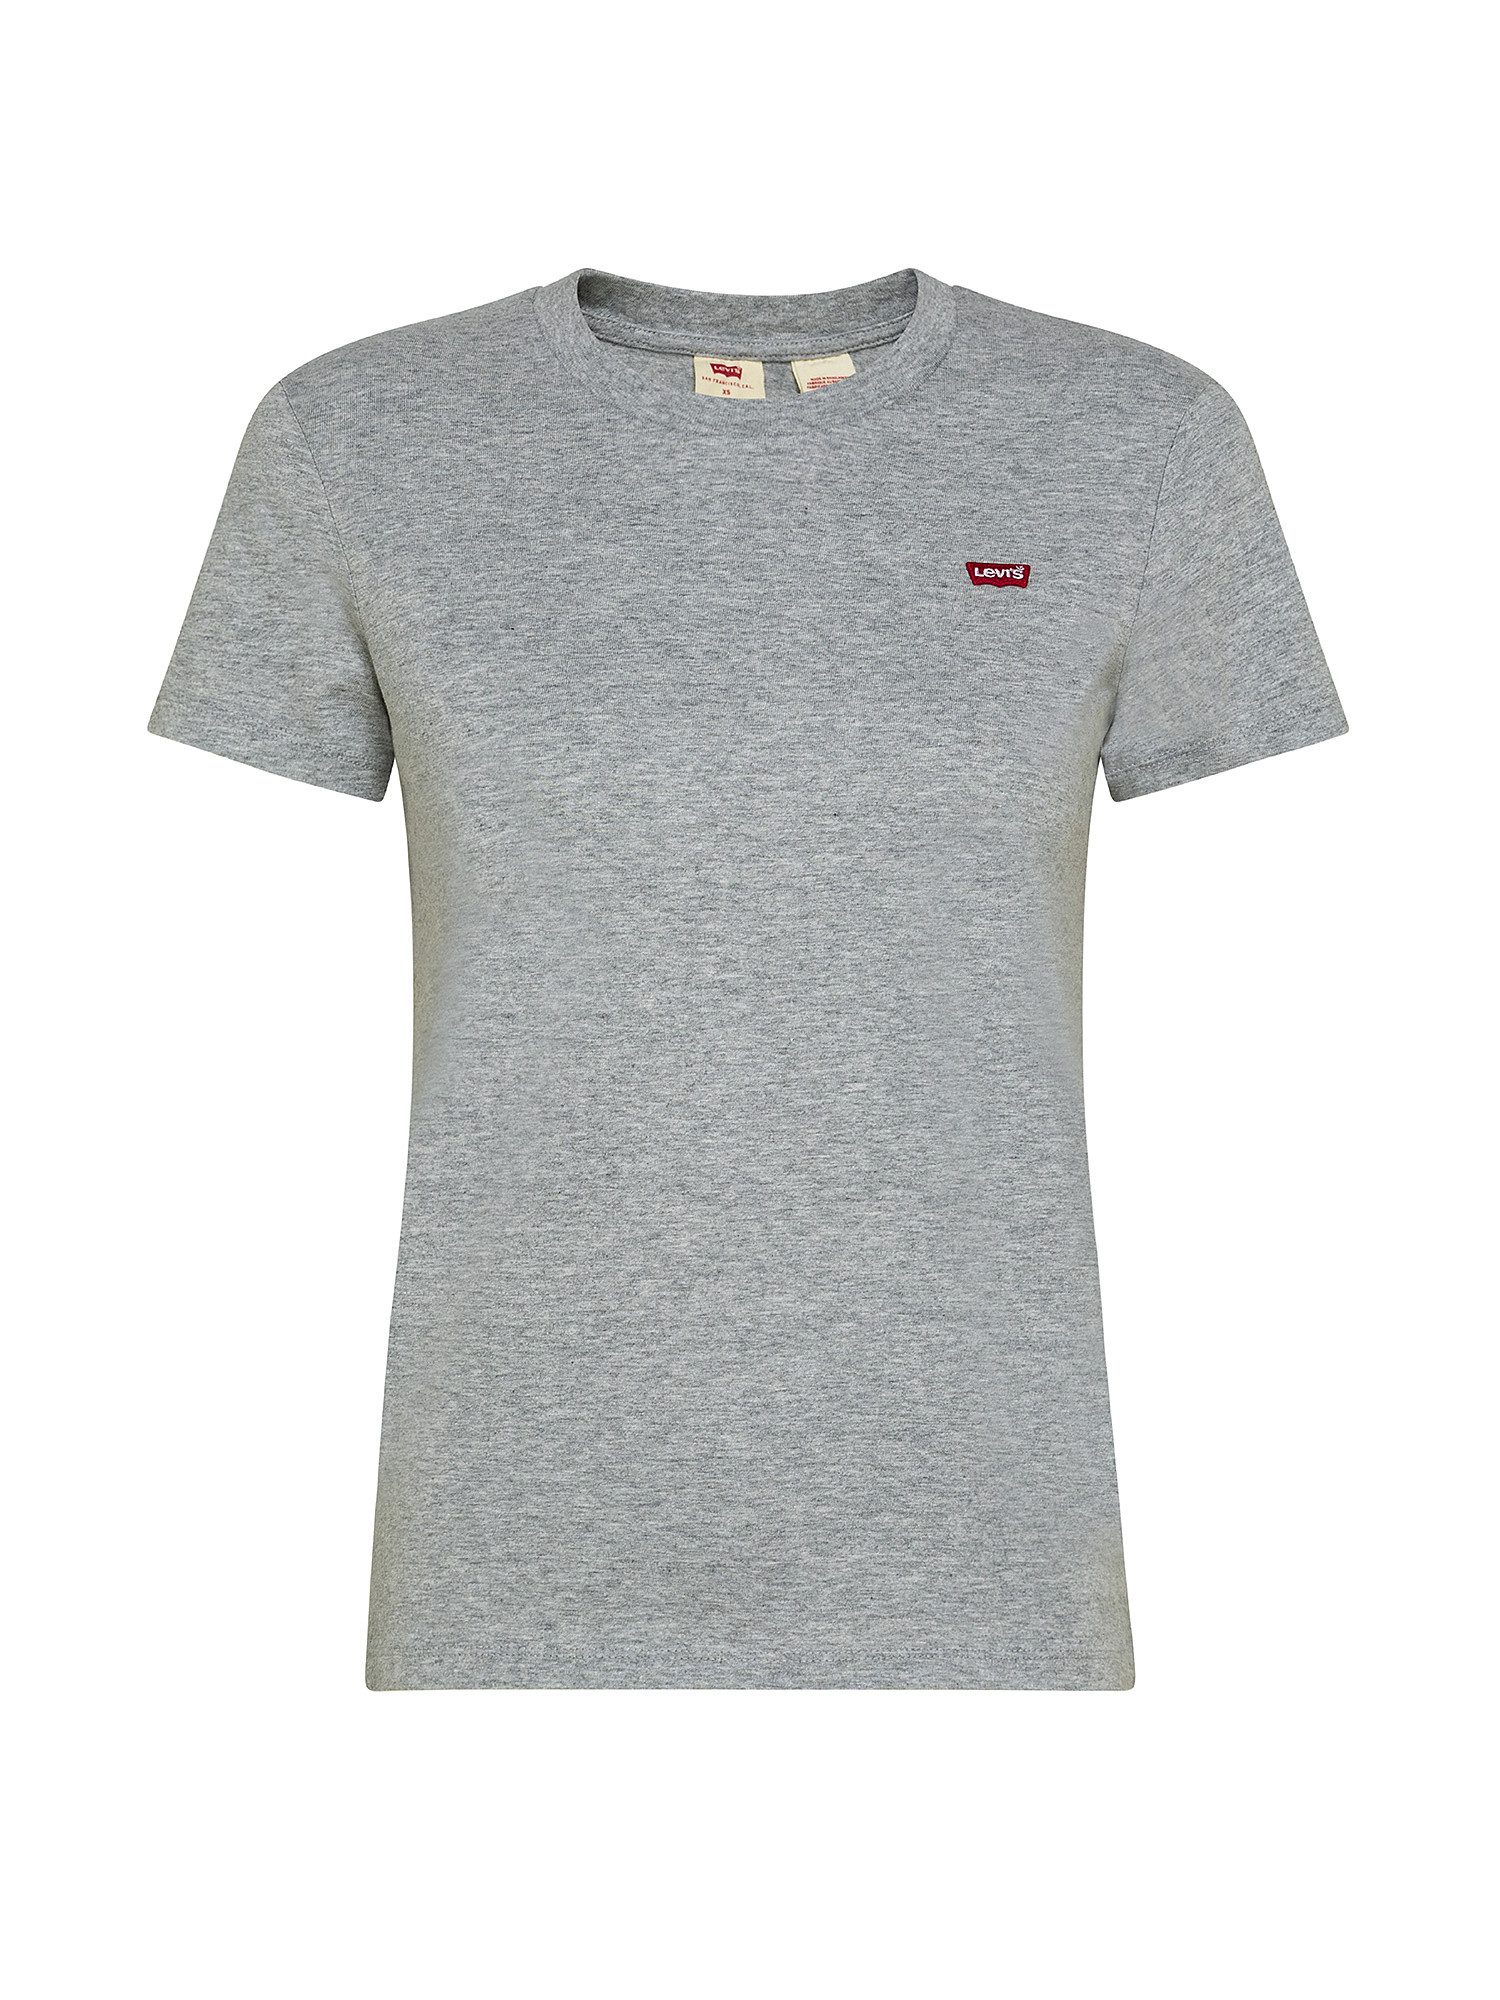 Perfect Tee T-shirt, Grey, large image number 0